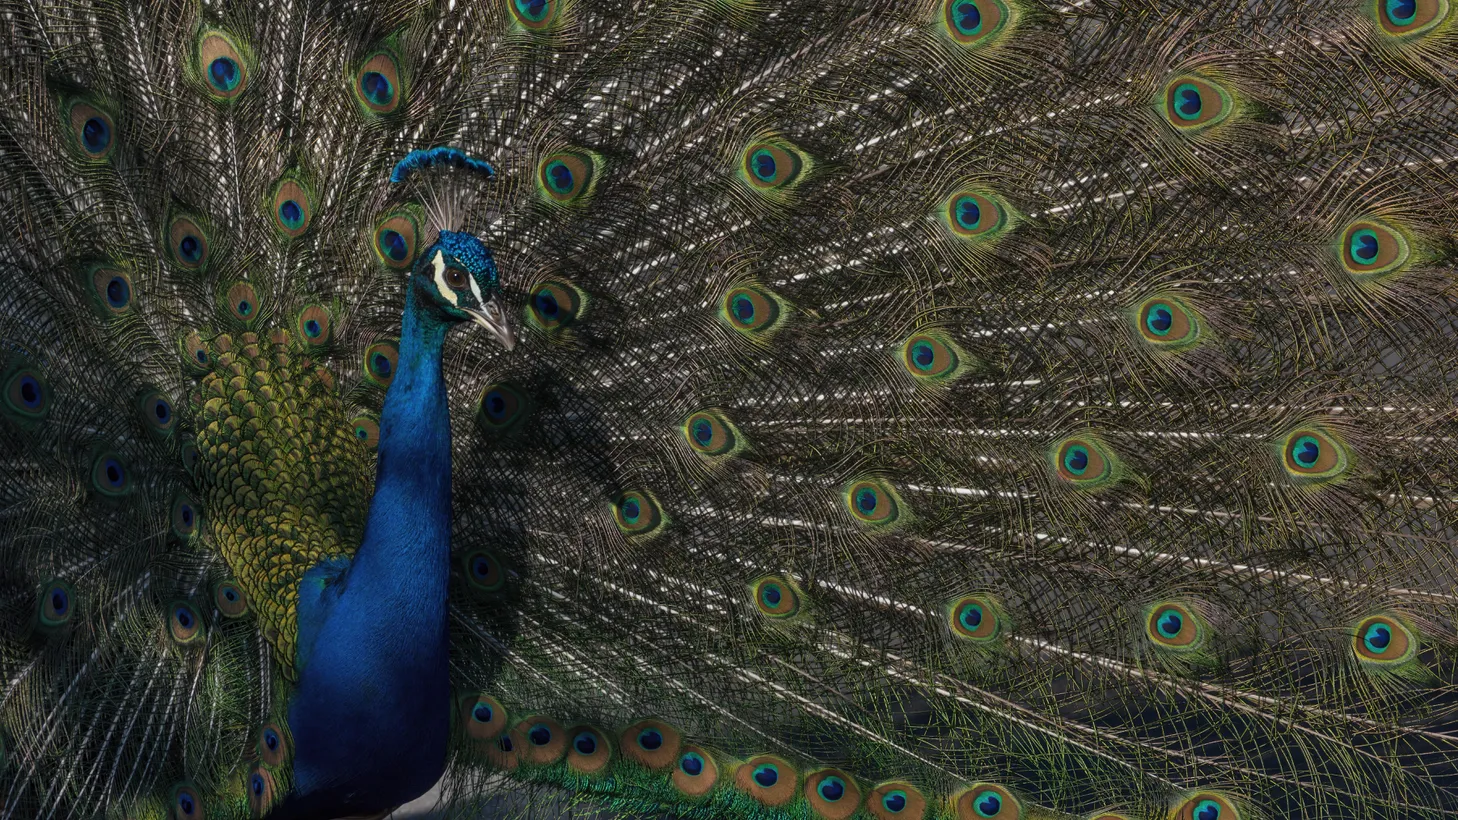 Peacocks were first imported to Southern California in the late 1800s.